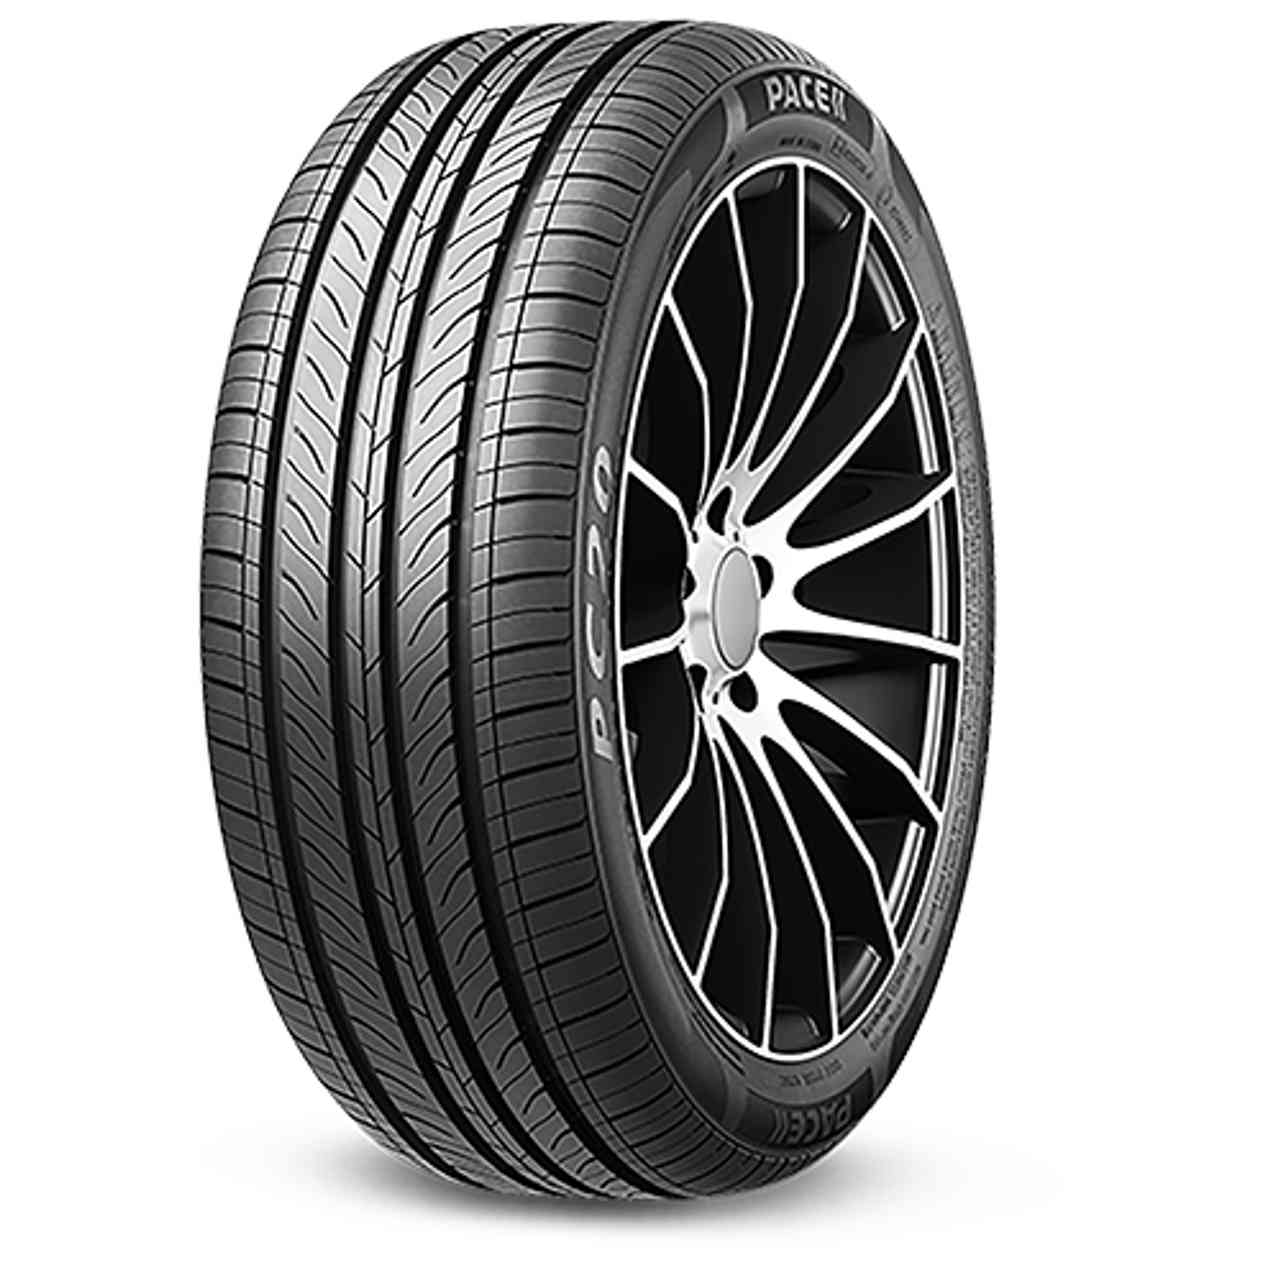 PACE PC20 185/70R13 86T BSW